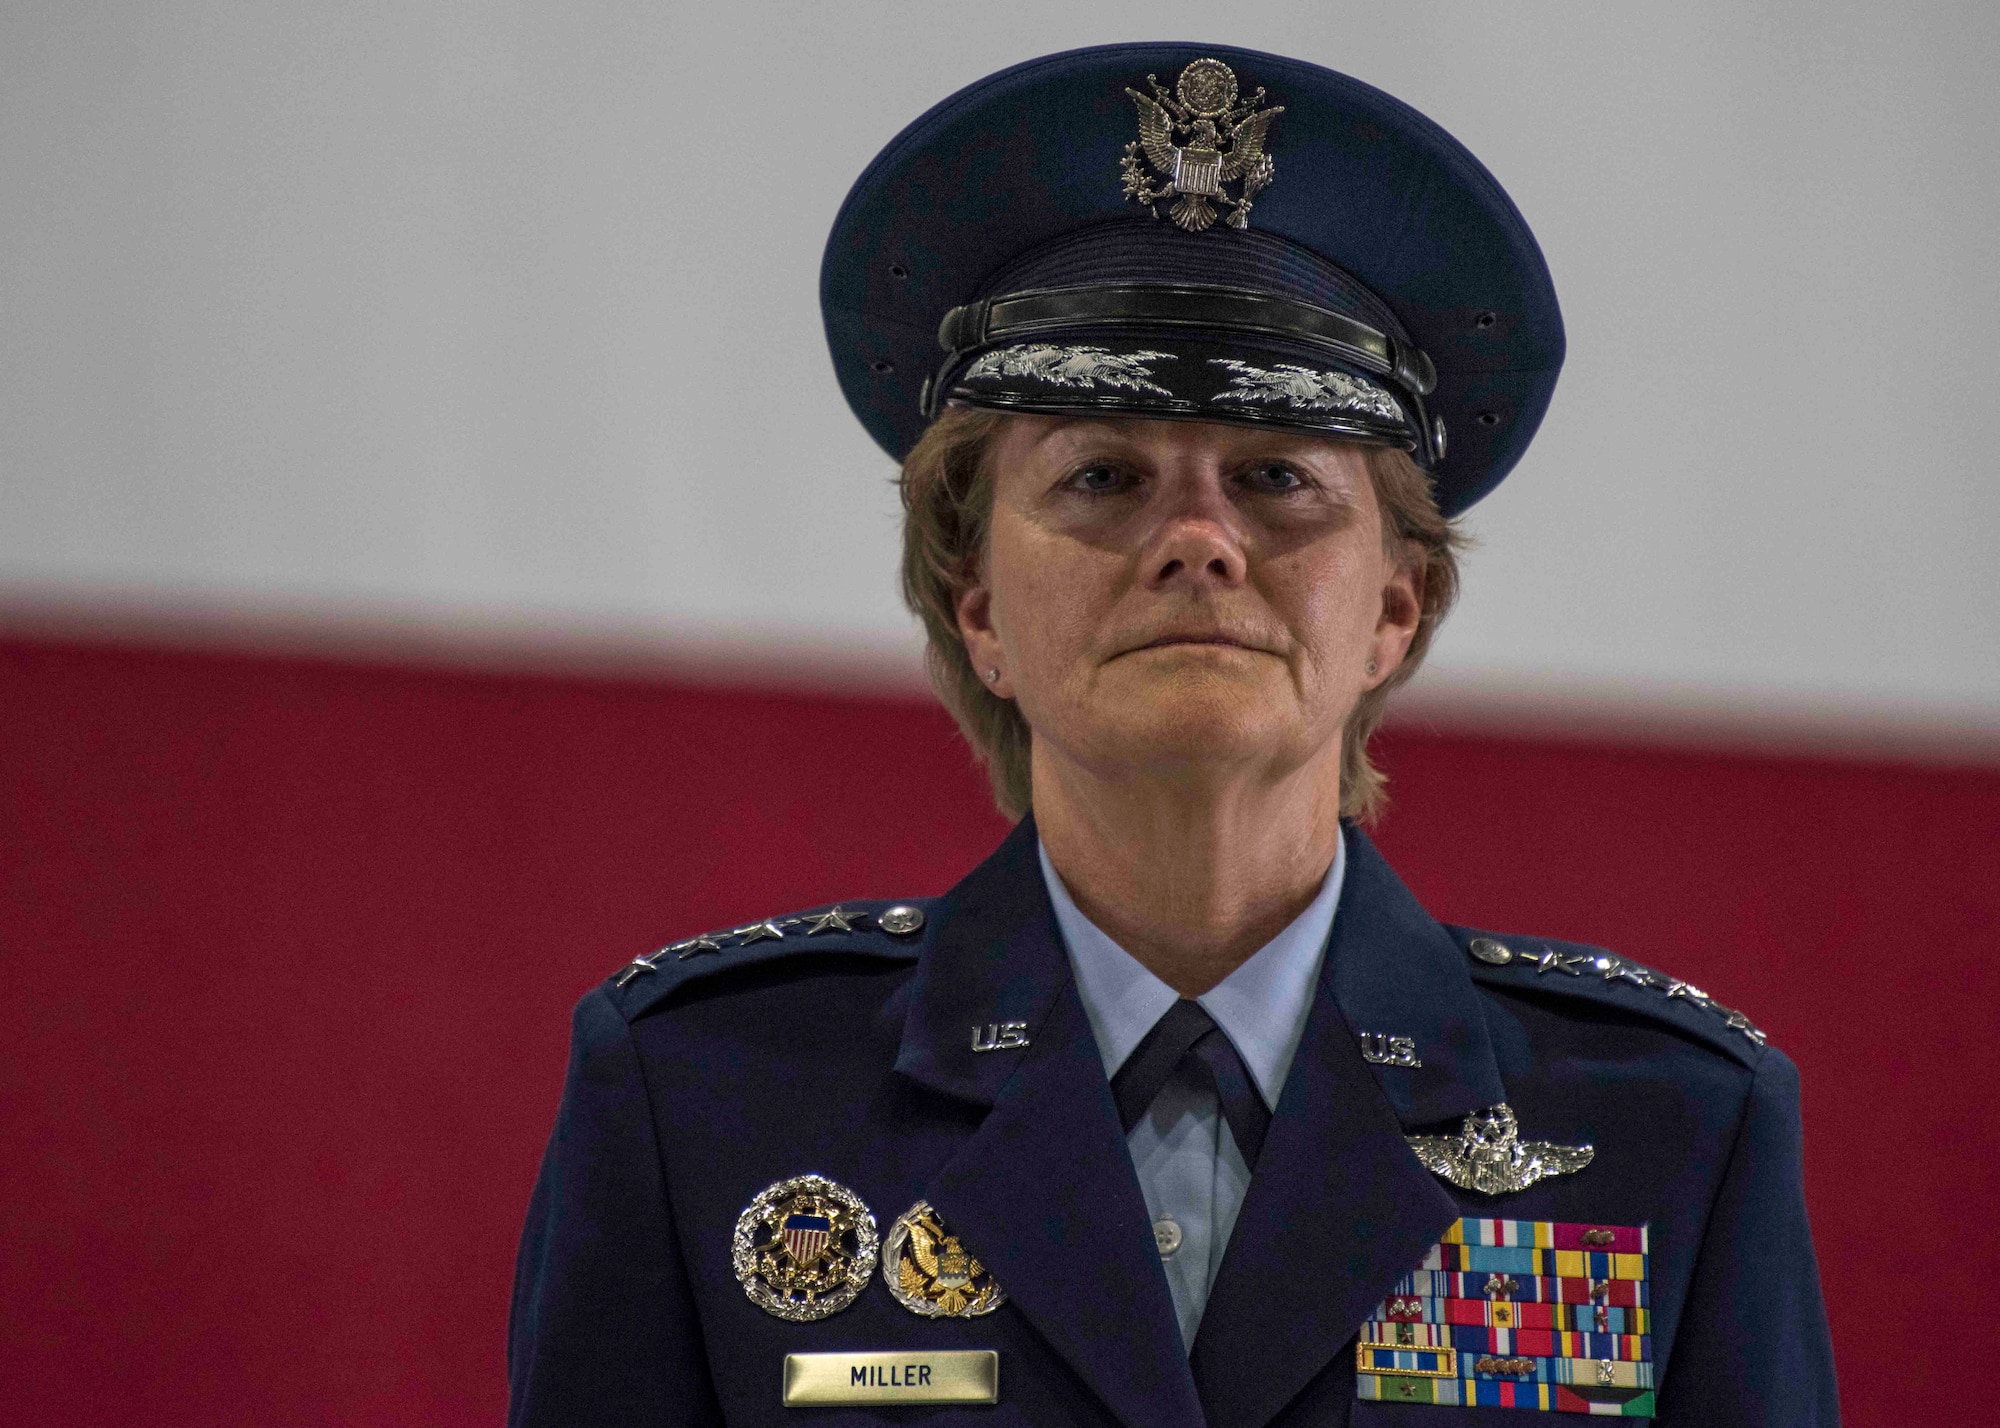 Gen. Maryanne Miller, Air Mobility Command commander, looks toward the audience after assuming command of AMC at Scott Air Force Base, Illinois, Sept. 7, 2018. Miller assumed command from Gen. Carlton D. Everhart II, who retires after 35 years of service to the Air Force. AMC provides rapid global air mobility and sustainment for America's armed forces through airlift, aerial refueling, aeromedical evacuation and mobility support. (U.S. Air Force photo by Tech. Sgt. Jodi Martinez)